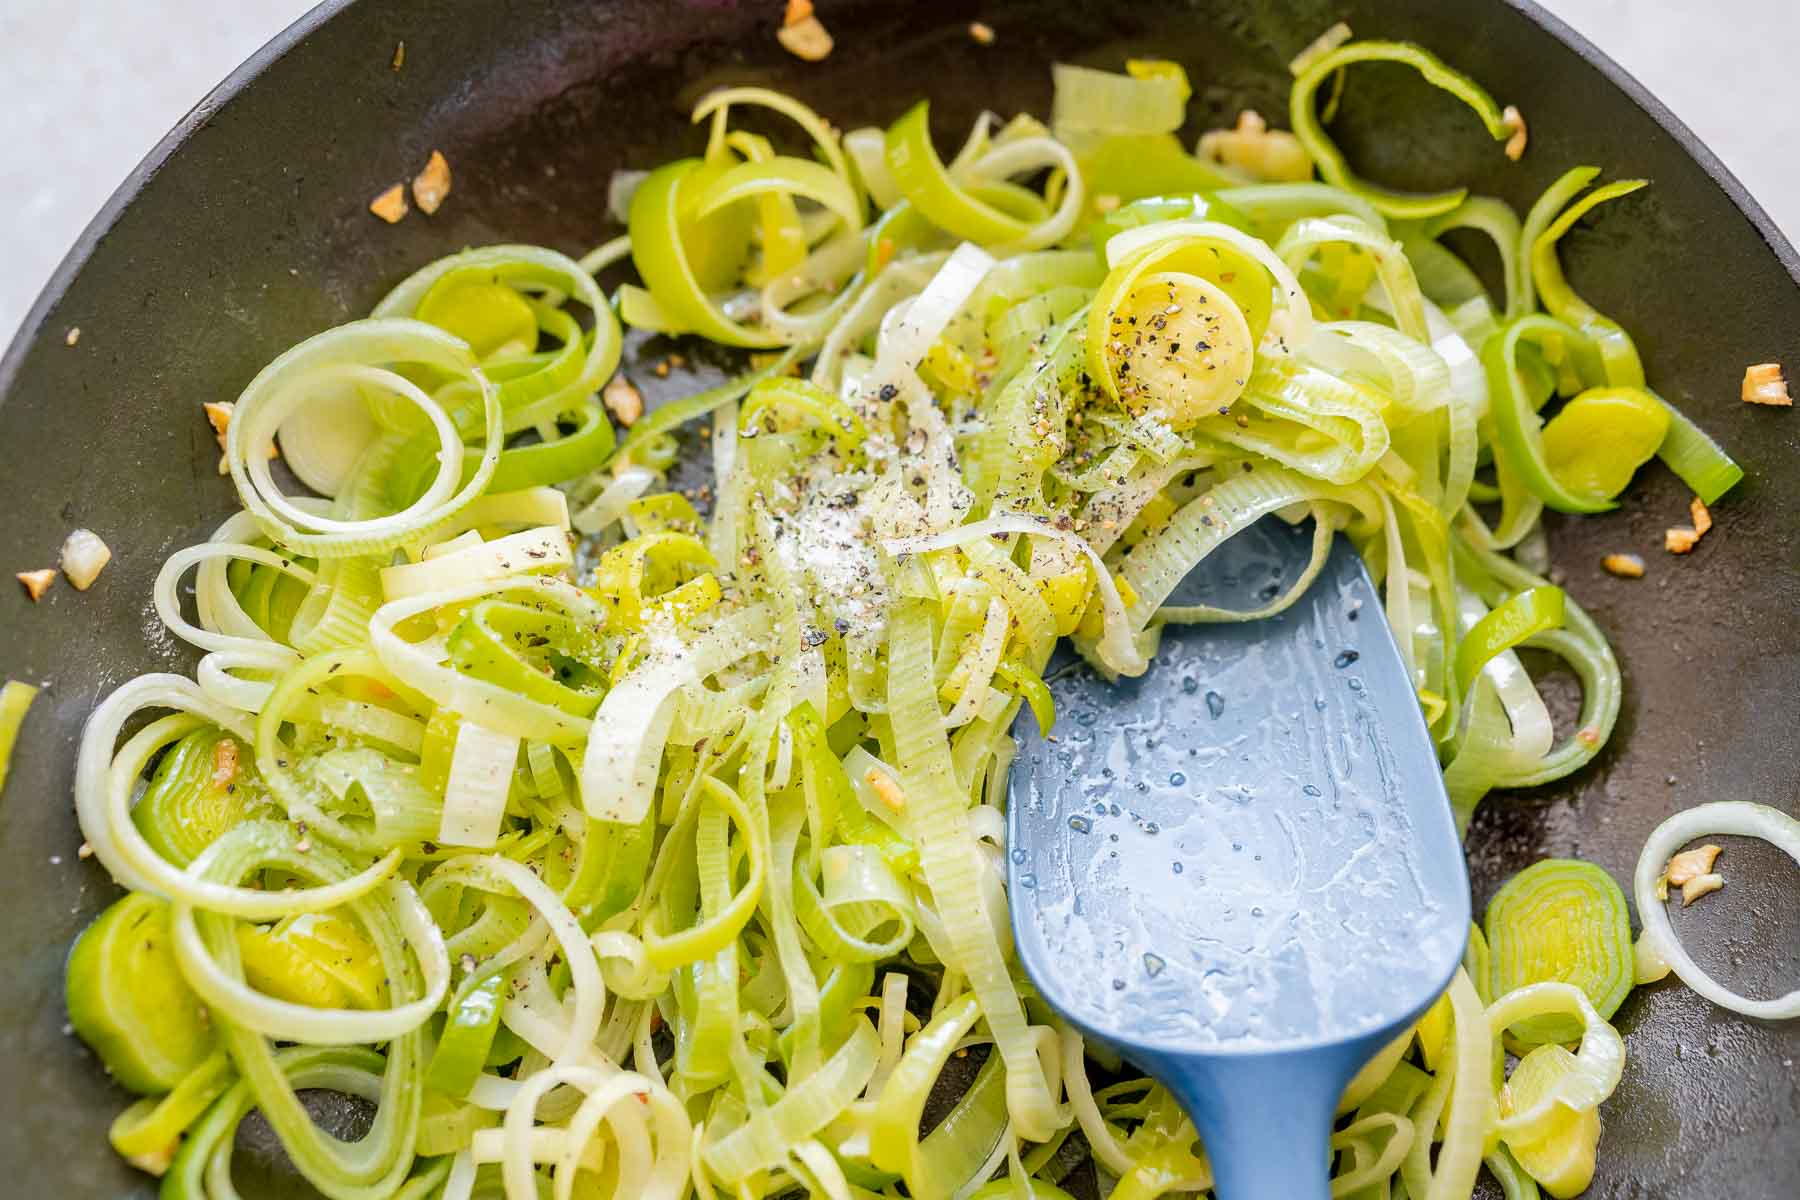 A blue silicone spatula rests in a large skillet of sliced leeks, salt and pepper.